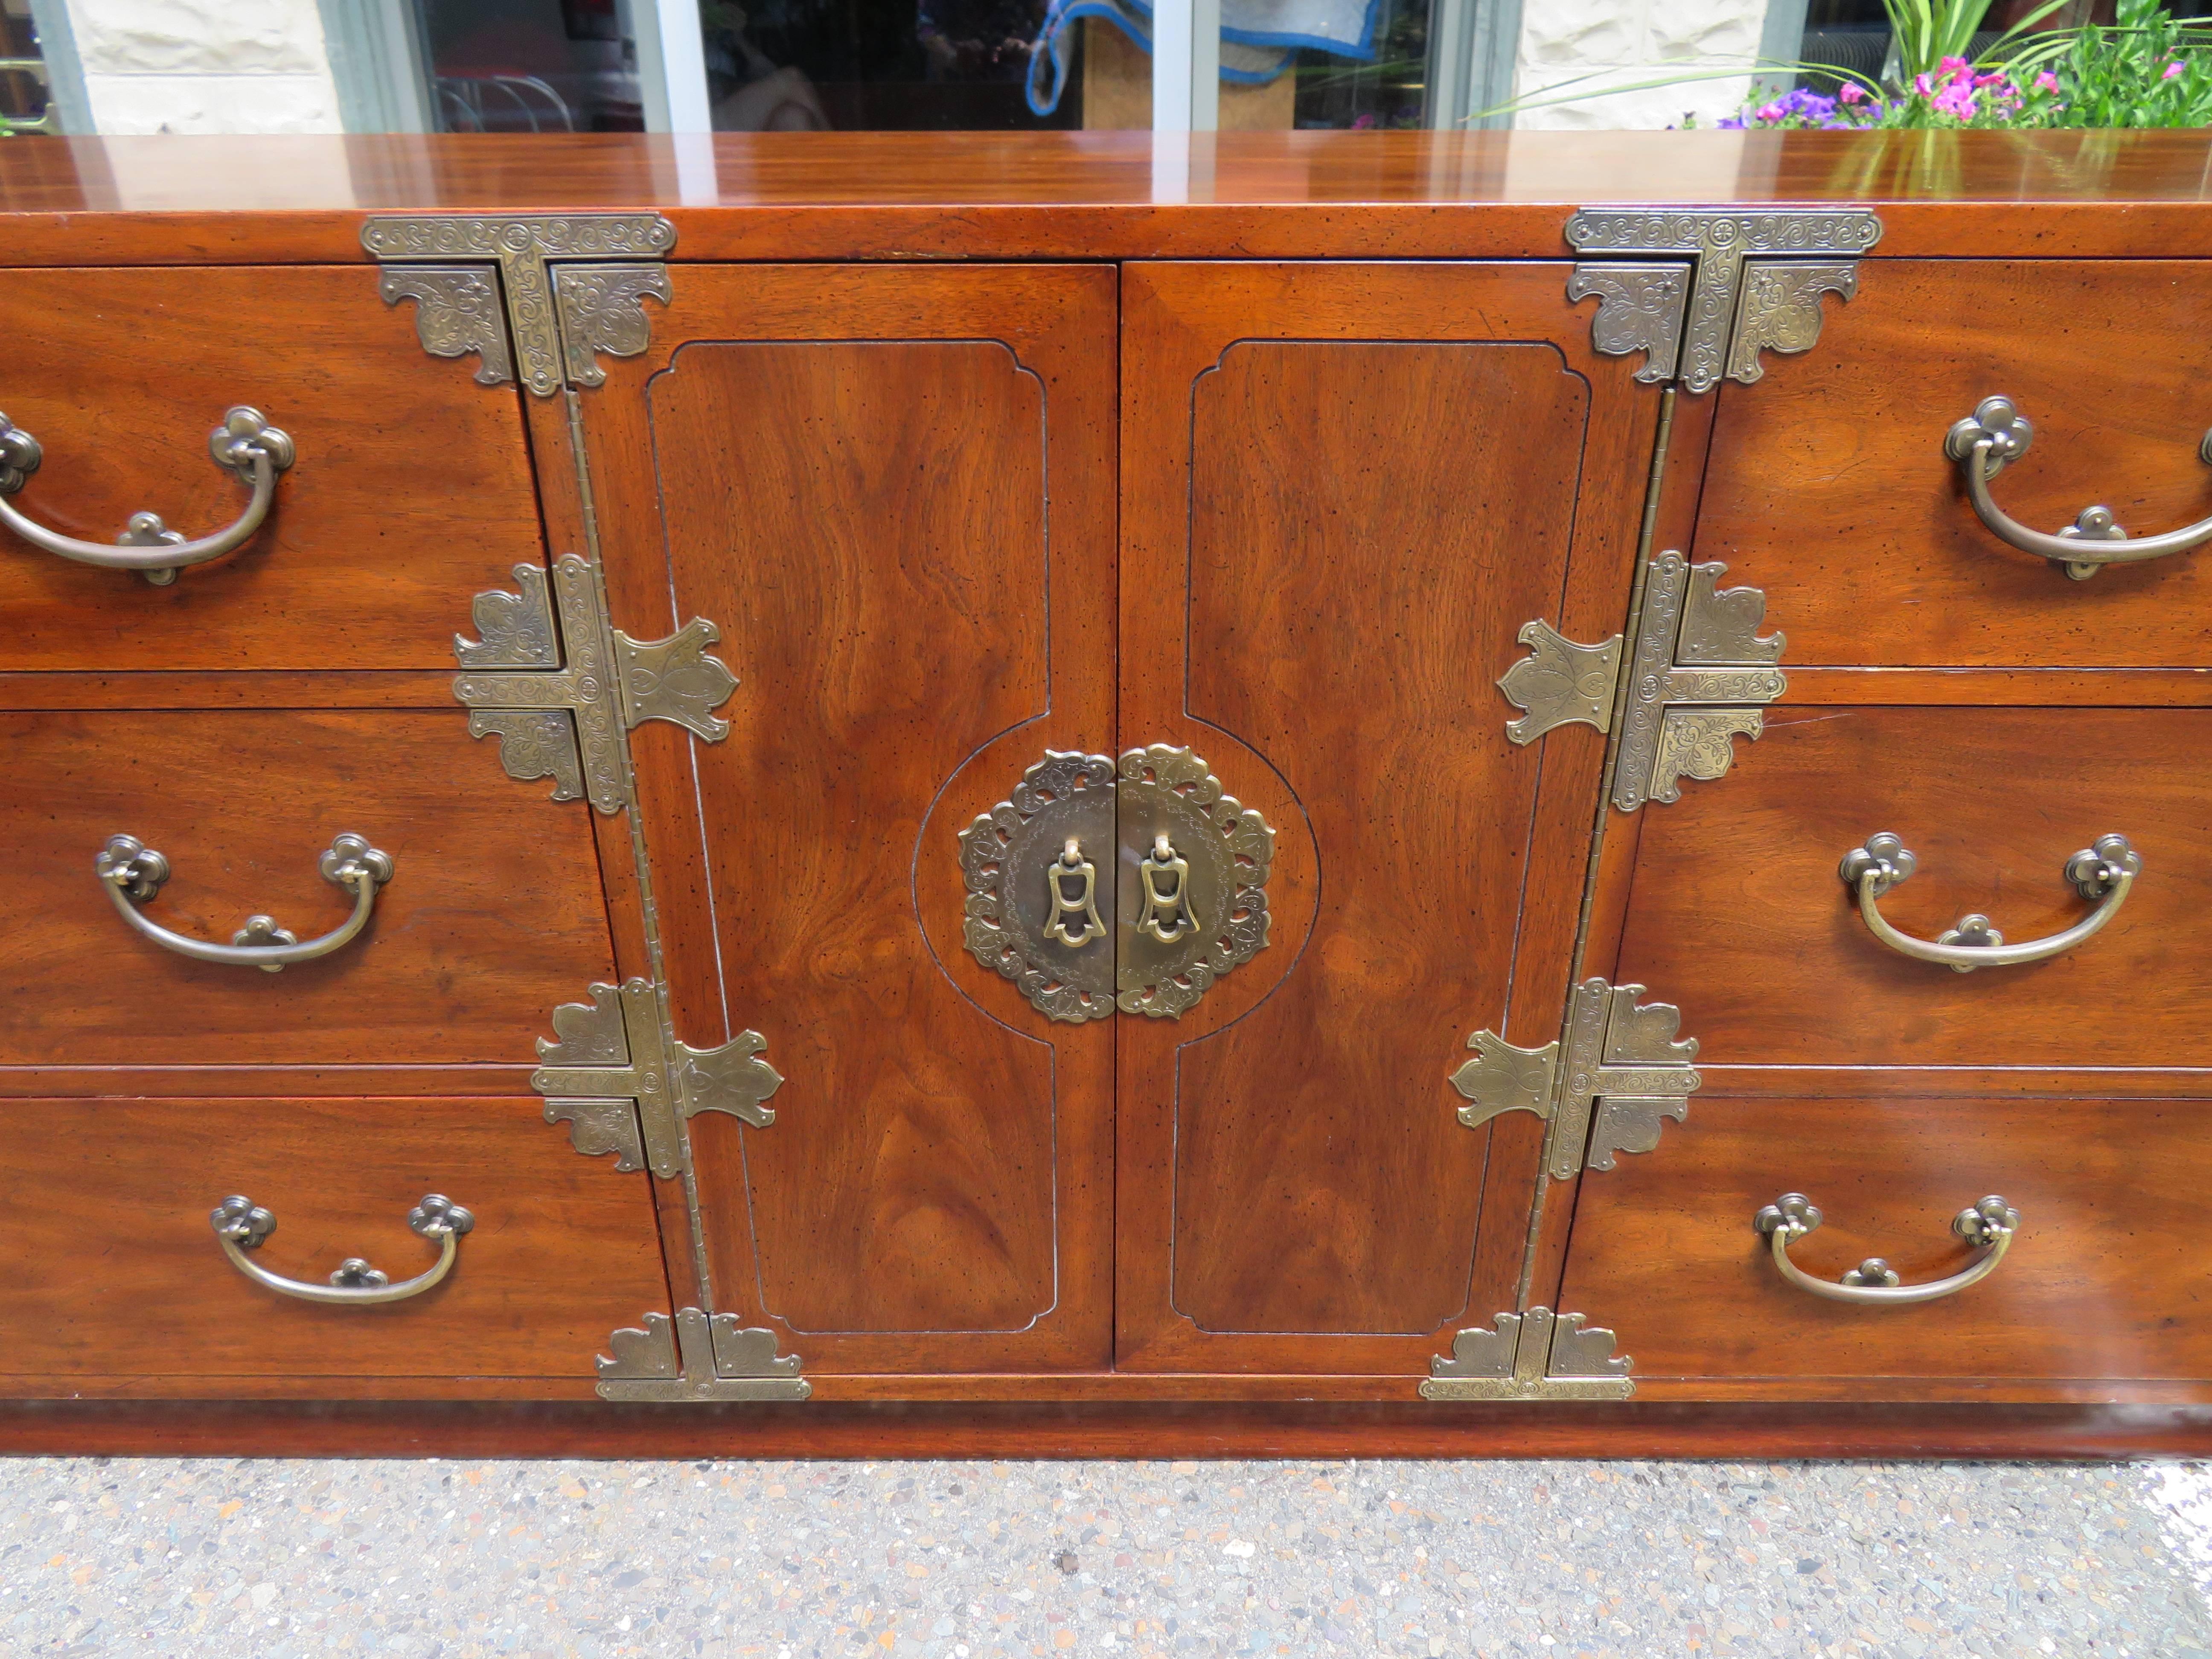 Gorgeous Mid-Century chinoiserie campaign credenza or long dresser by Henredon Fine Furniture. This credenza features clean, sleek Mid-Century design with an Asian flair. It offers ample room for storage with 9 deep drawers. We love the stylish